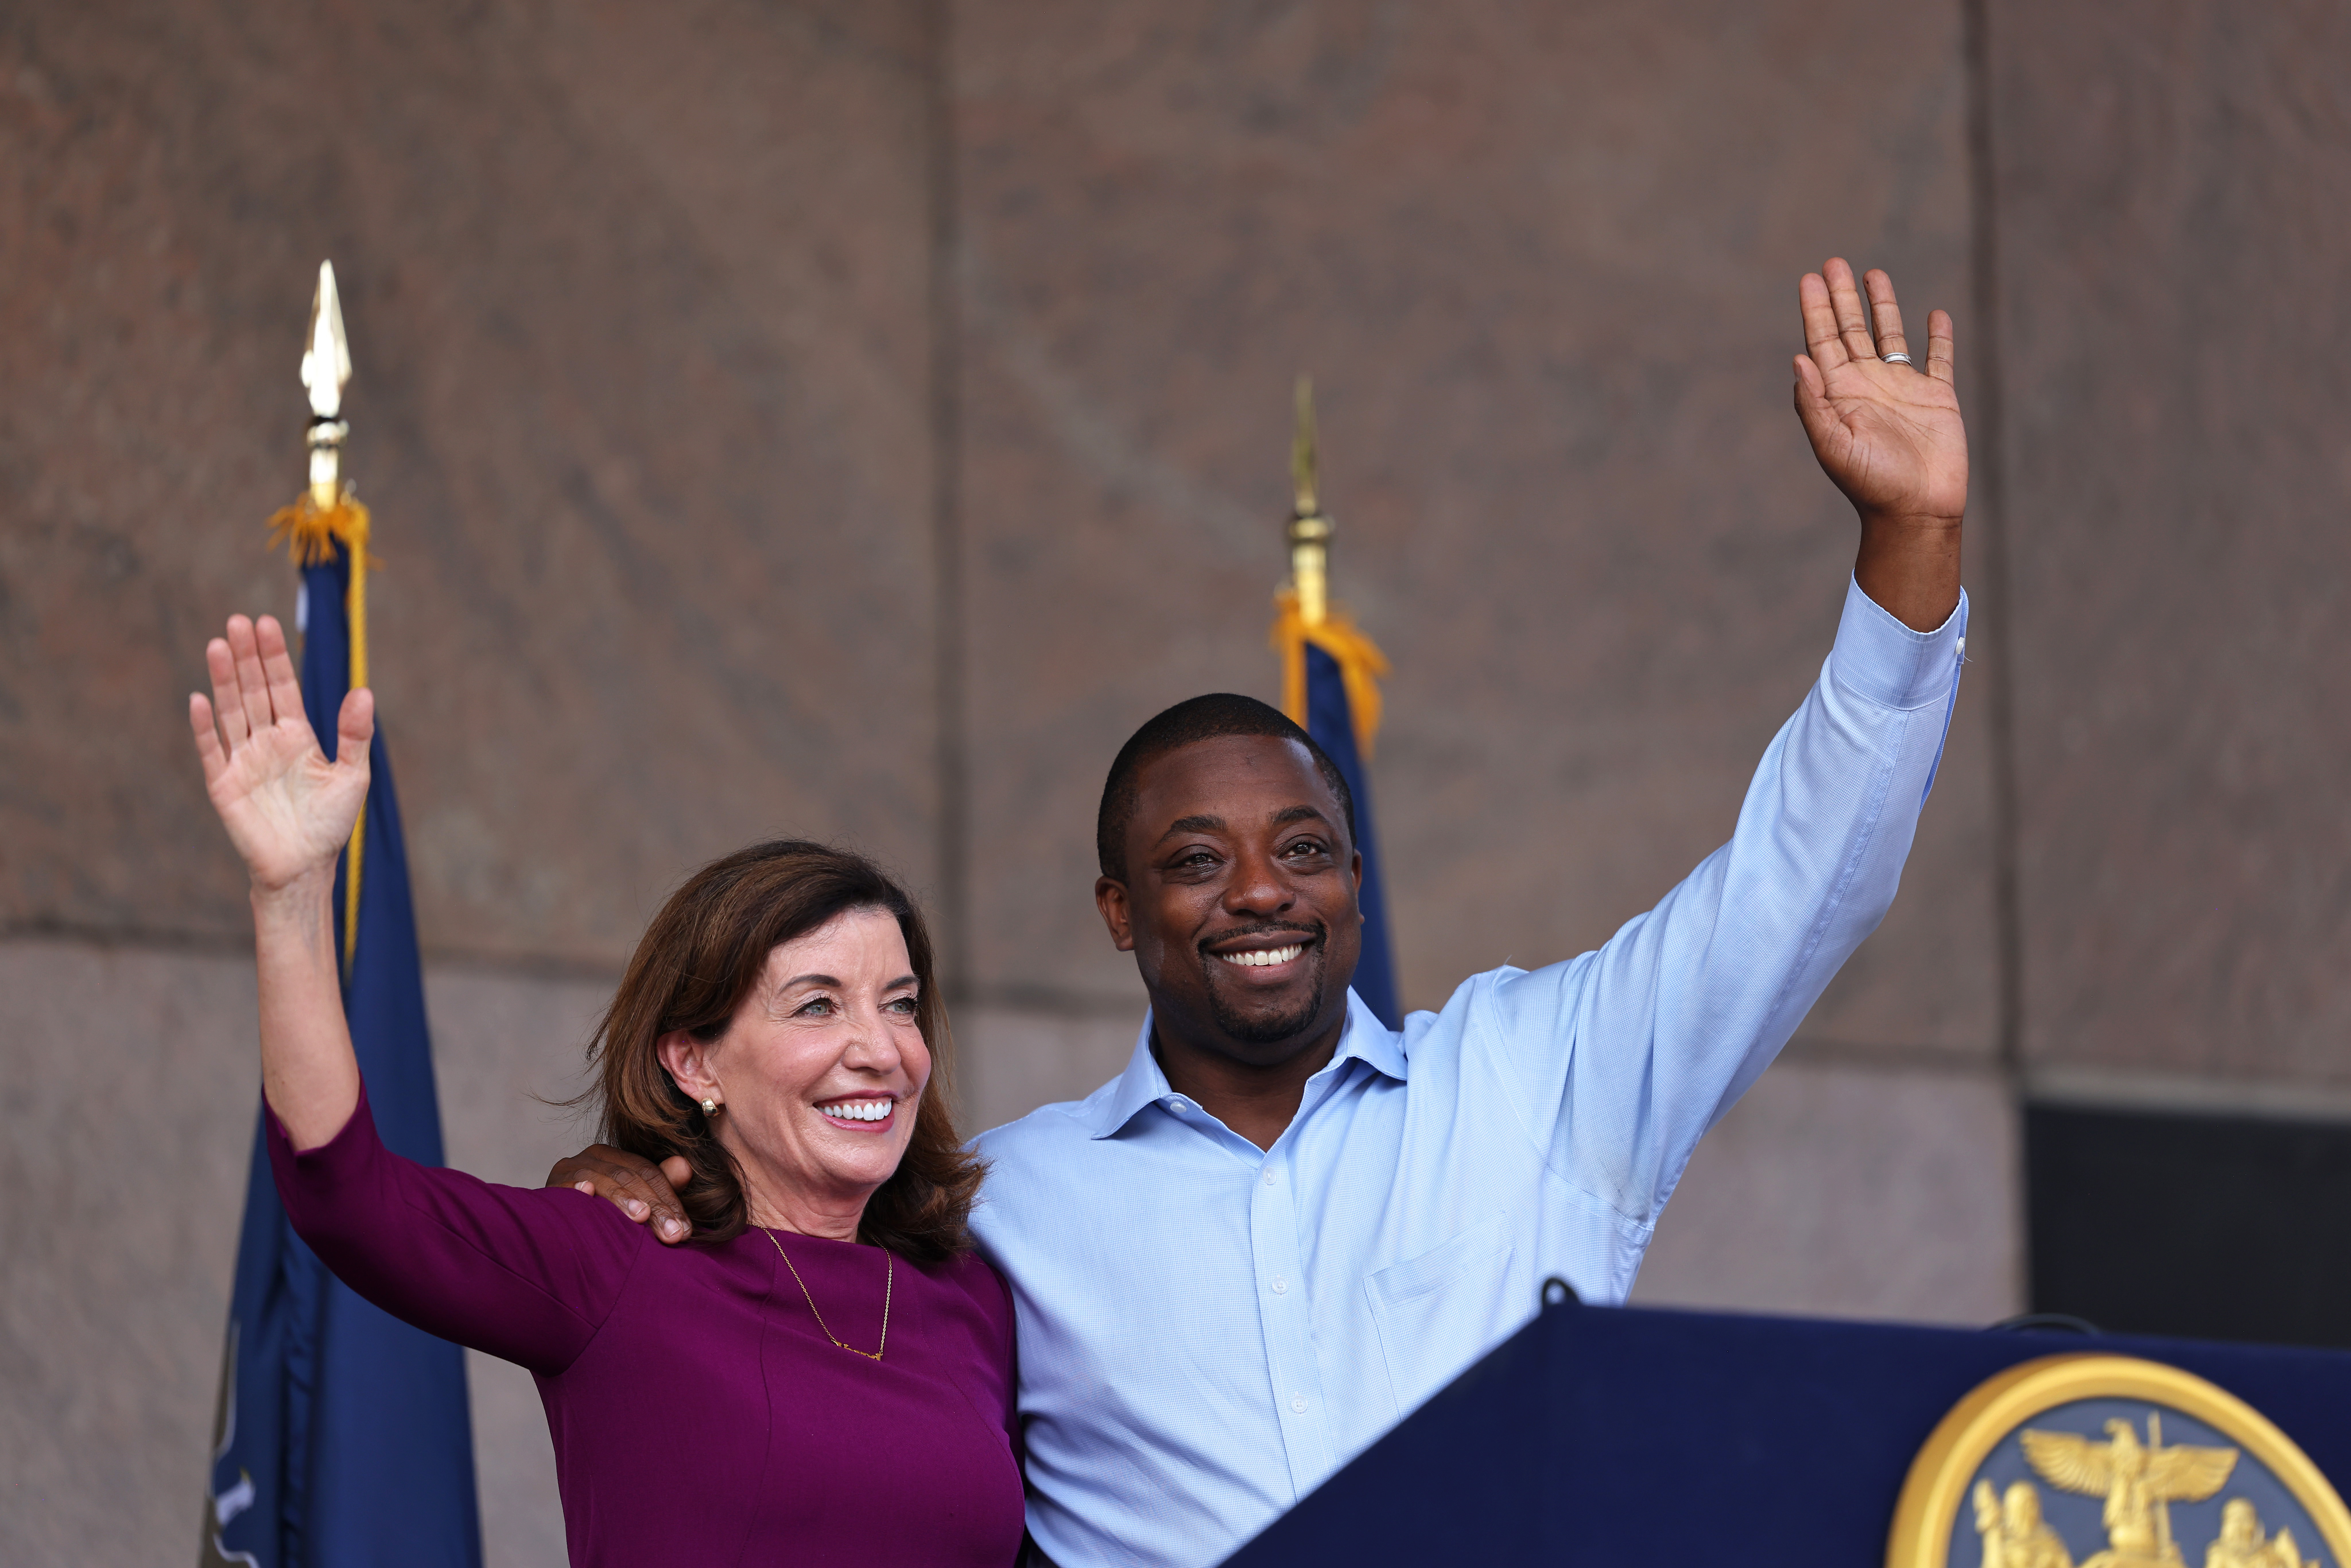 Governor Hochul Makes Special Announcement With State Senator Brian Benjamin